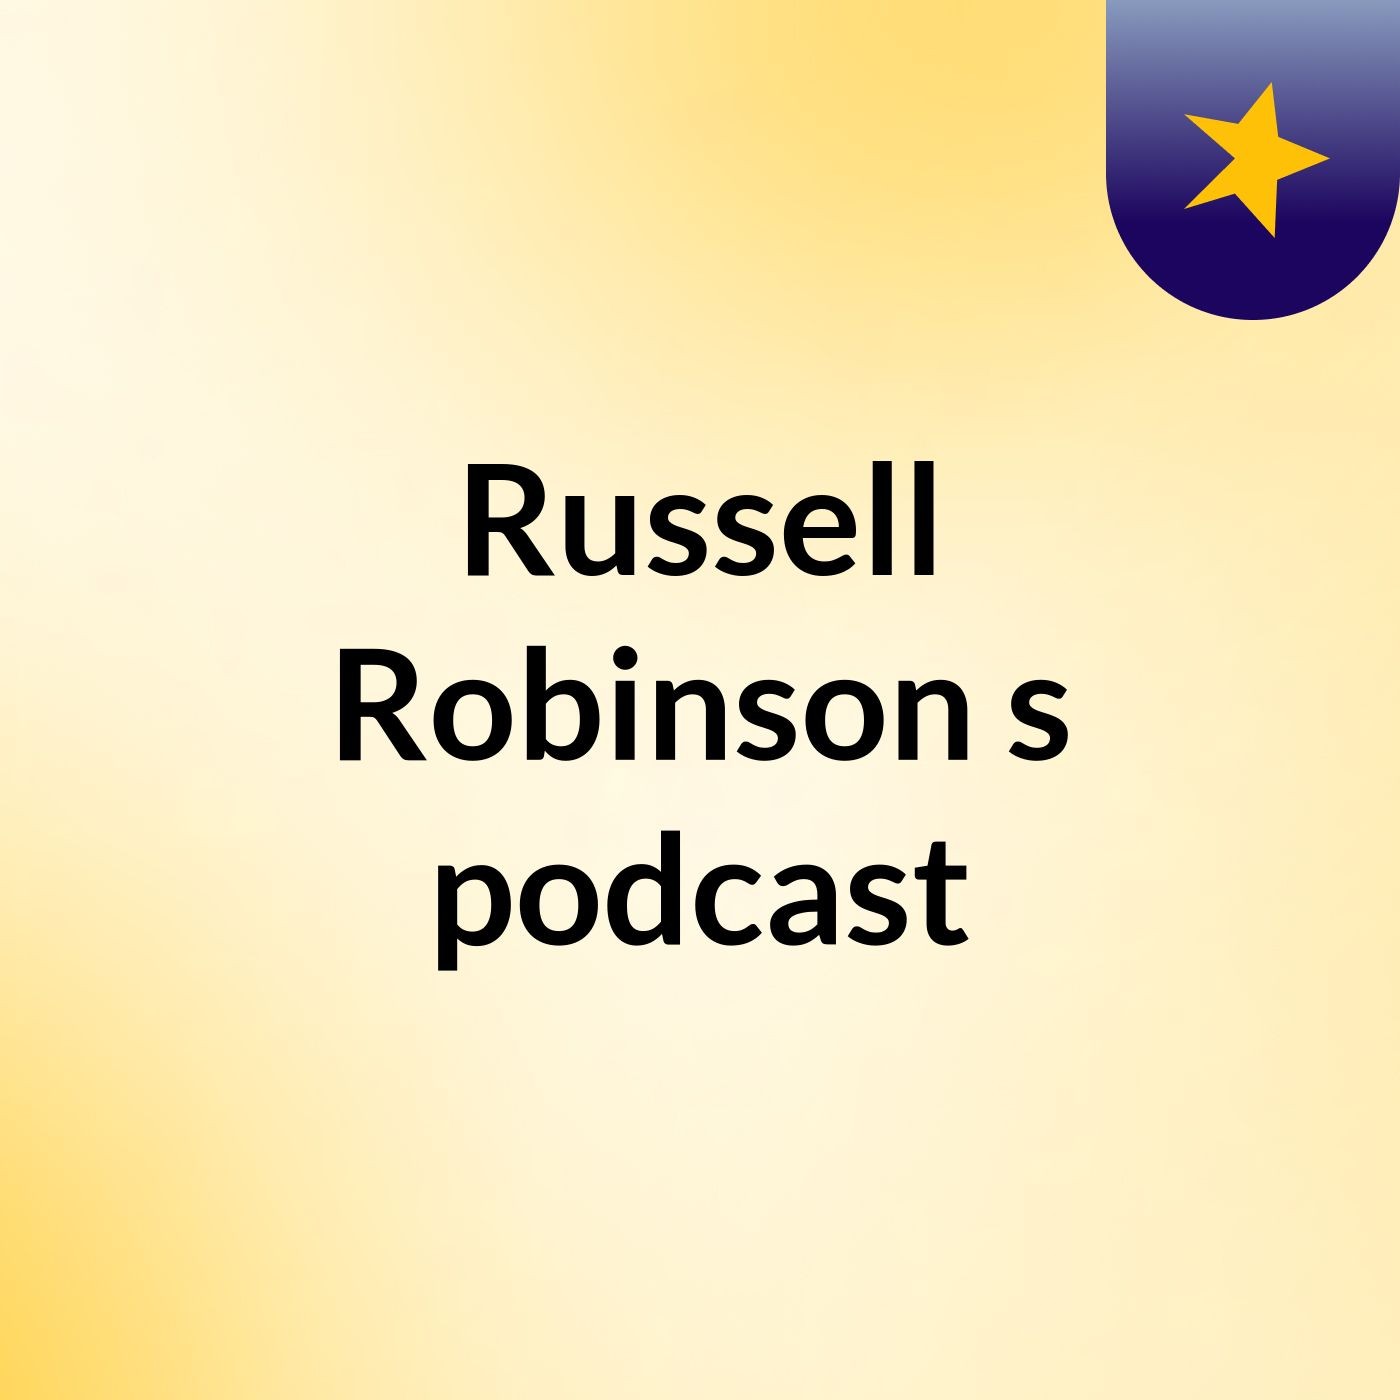 Russell Robinson's podcast